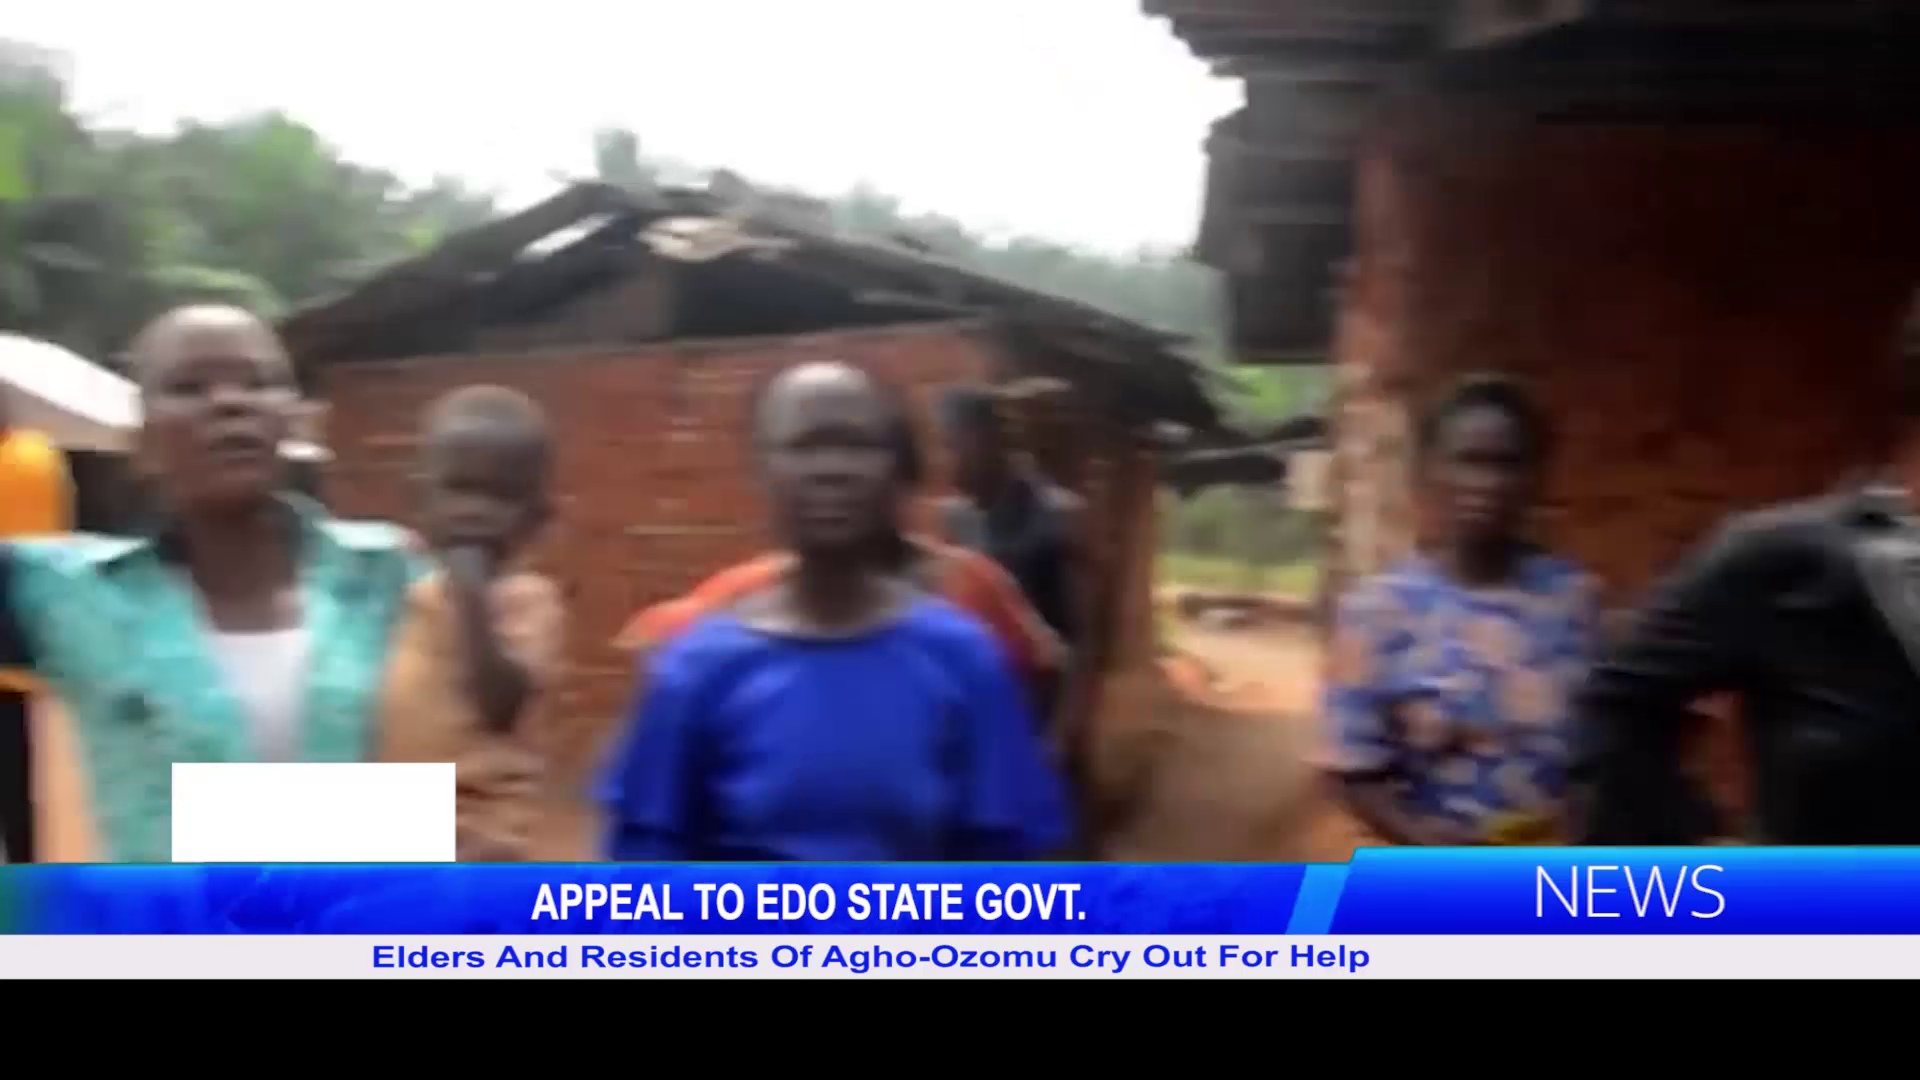 Elders And Residents Of Agho-Ozomu Cryout For Help